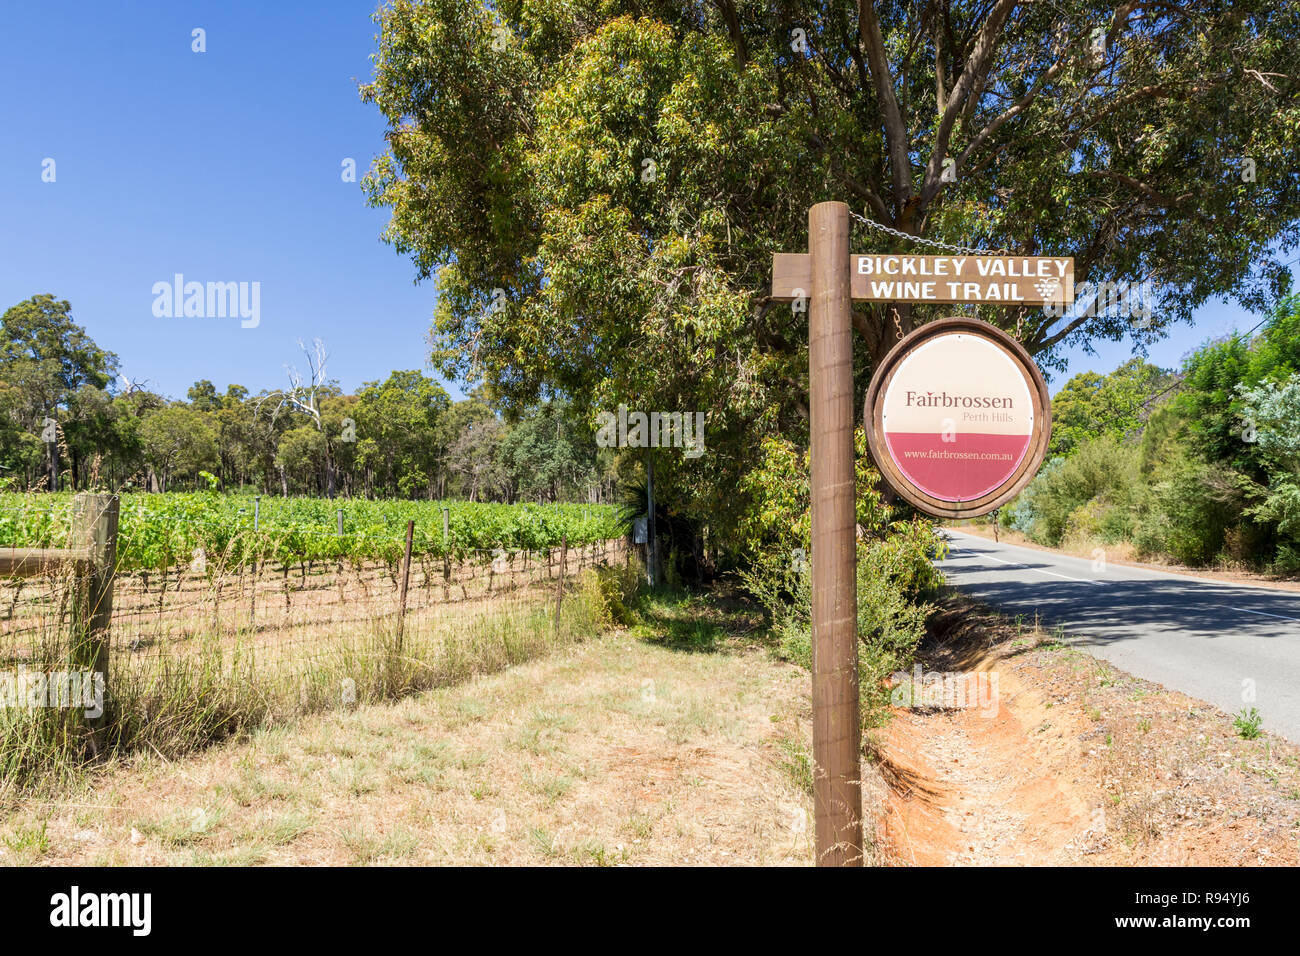 Fairbrossen Winery and Cafe sign along the Bickley Valley Wine Trail, Carmel, Western Australia Stock Photo